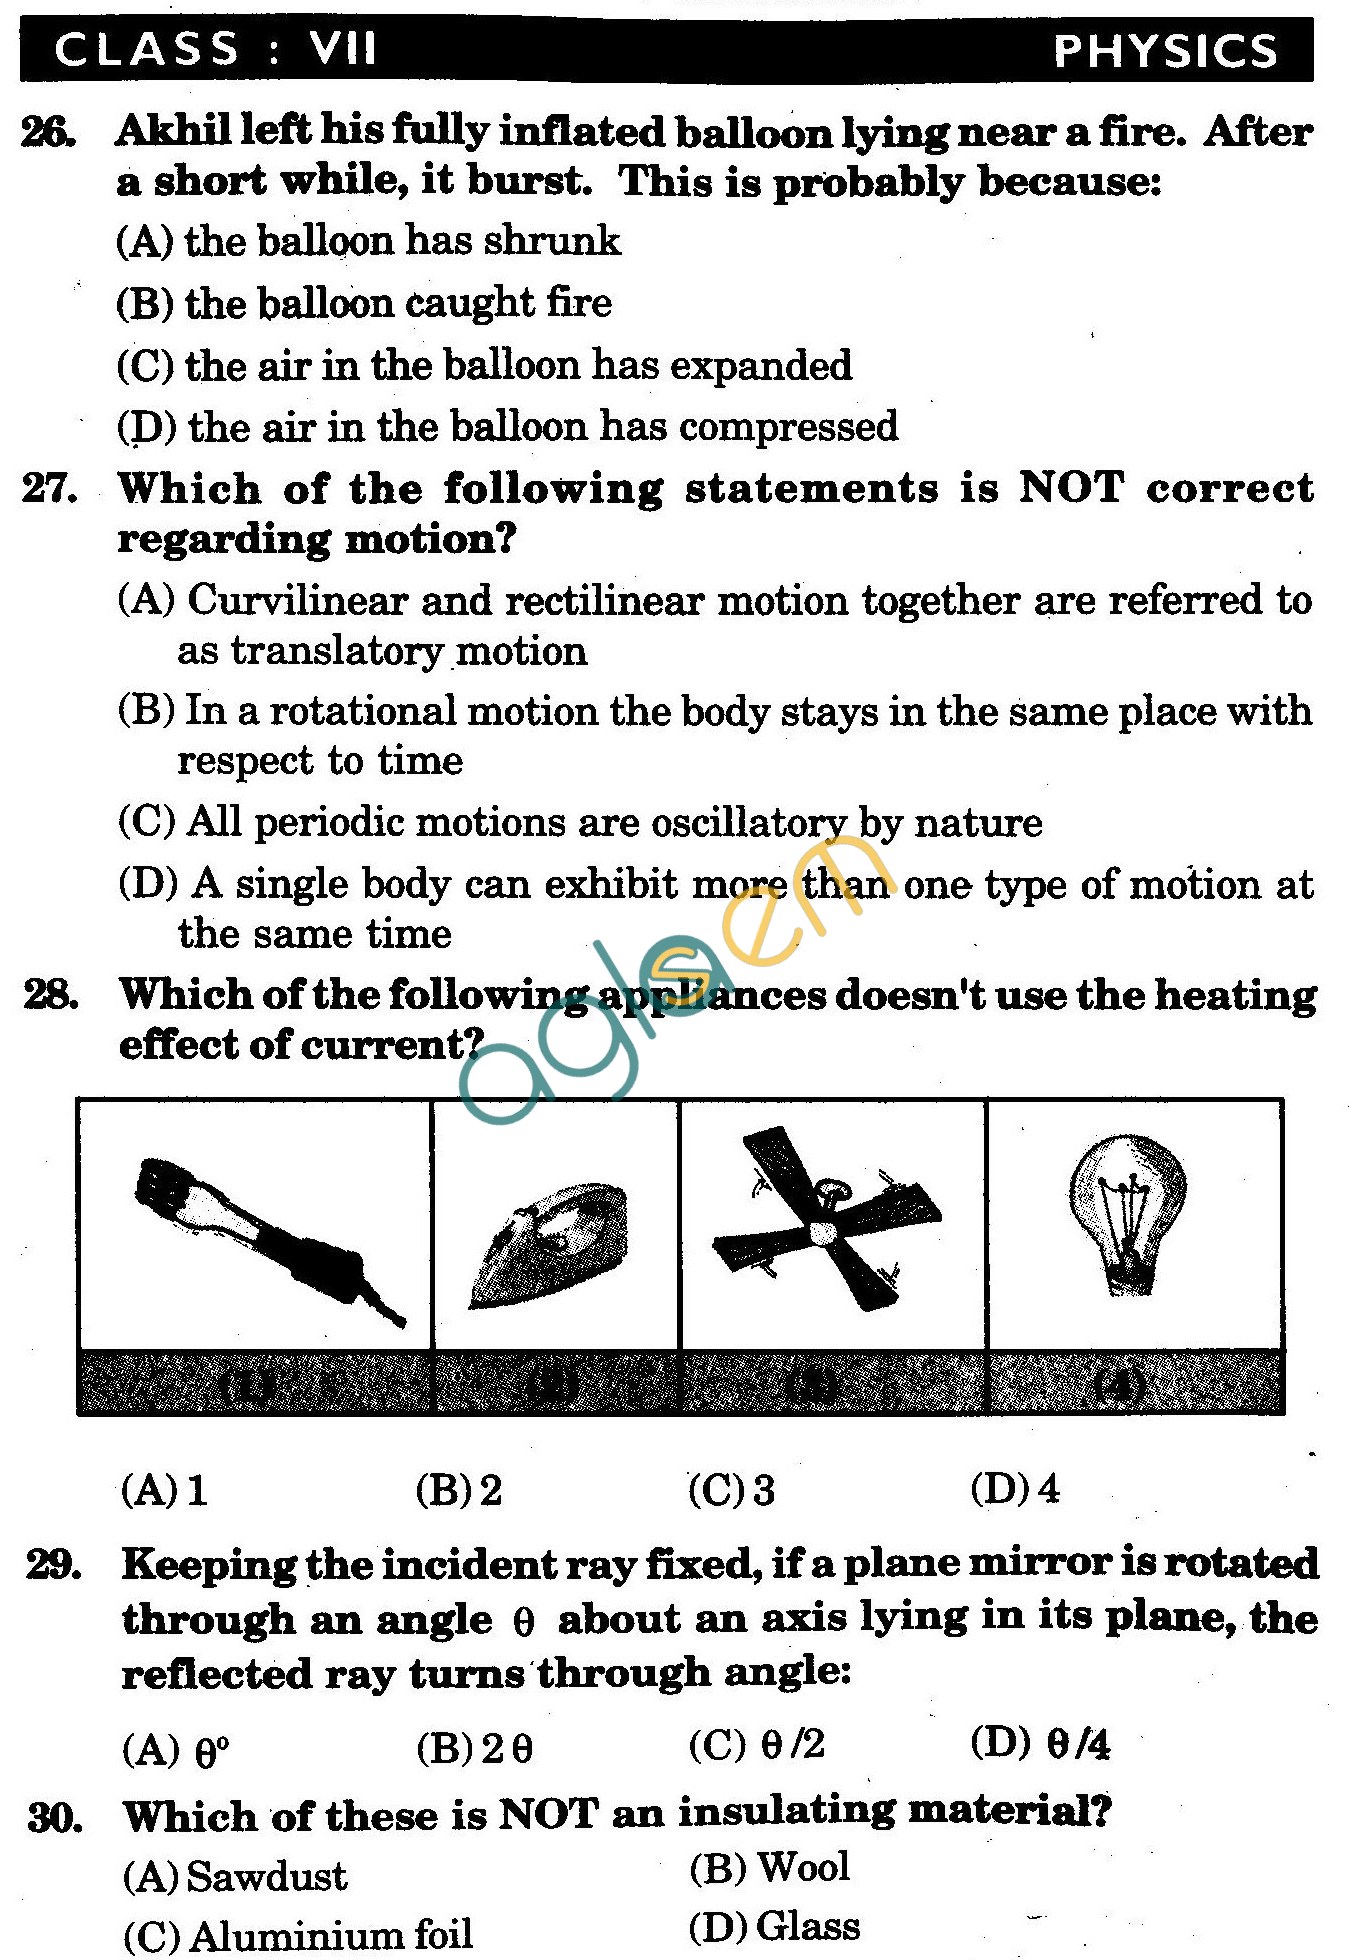 NSTSE 2009 Class VII Question Paper with Answers - Physics